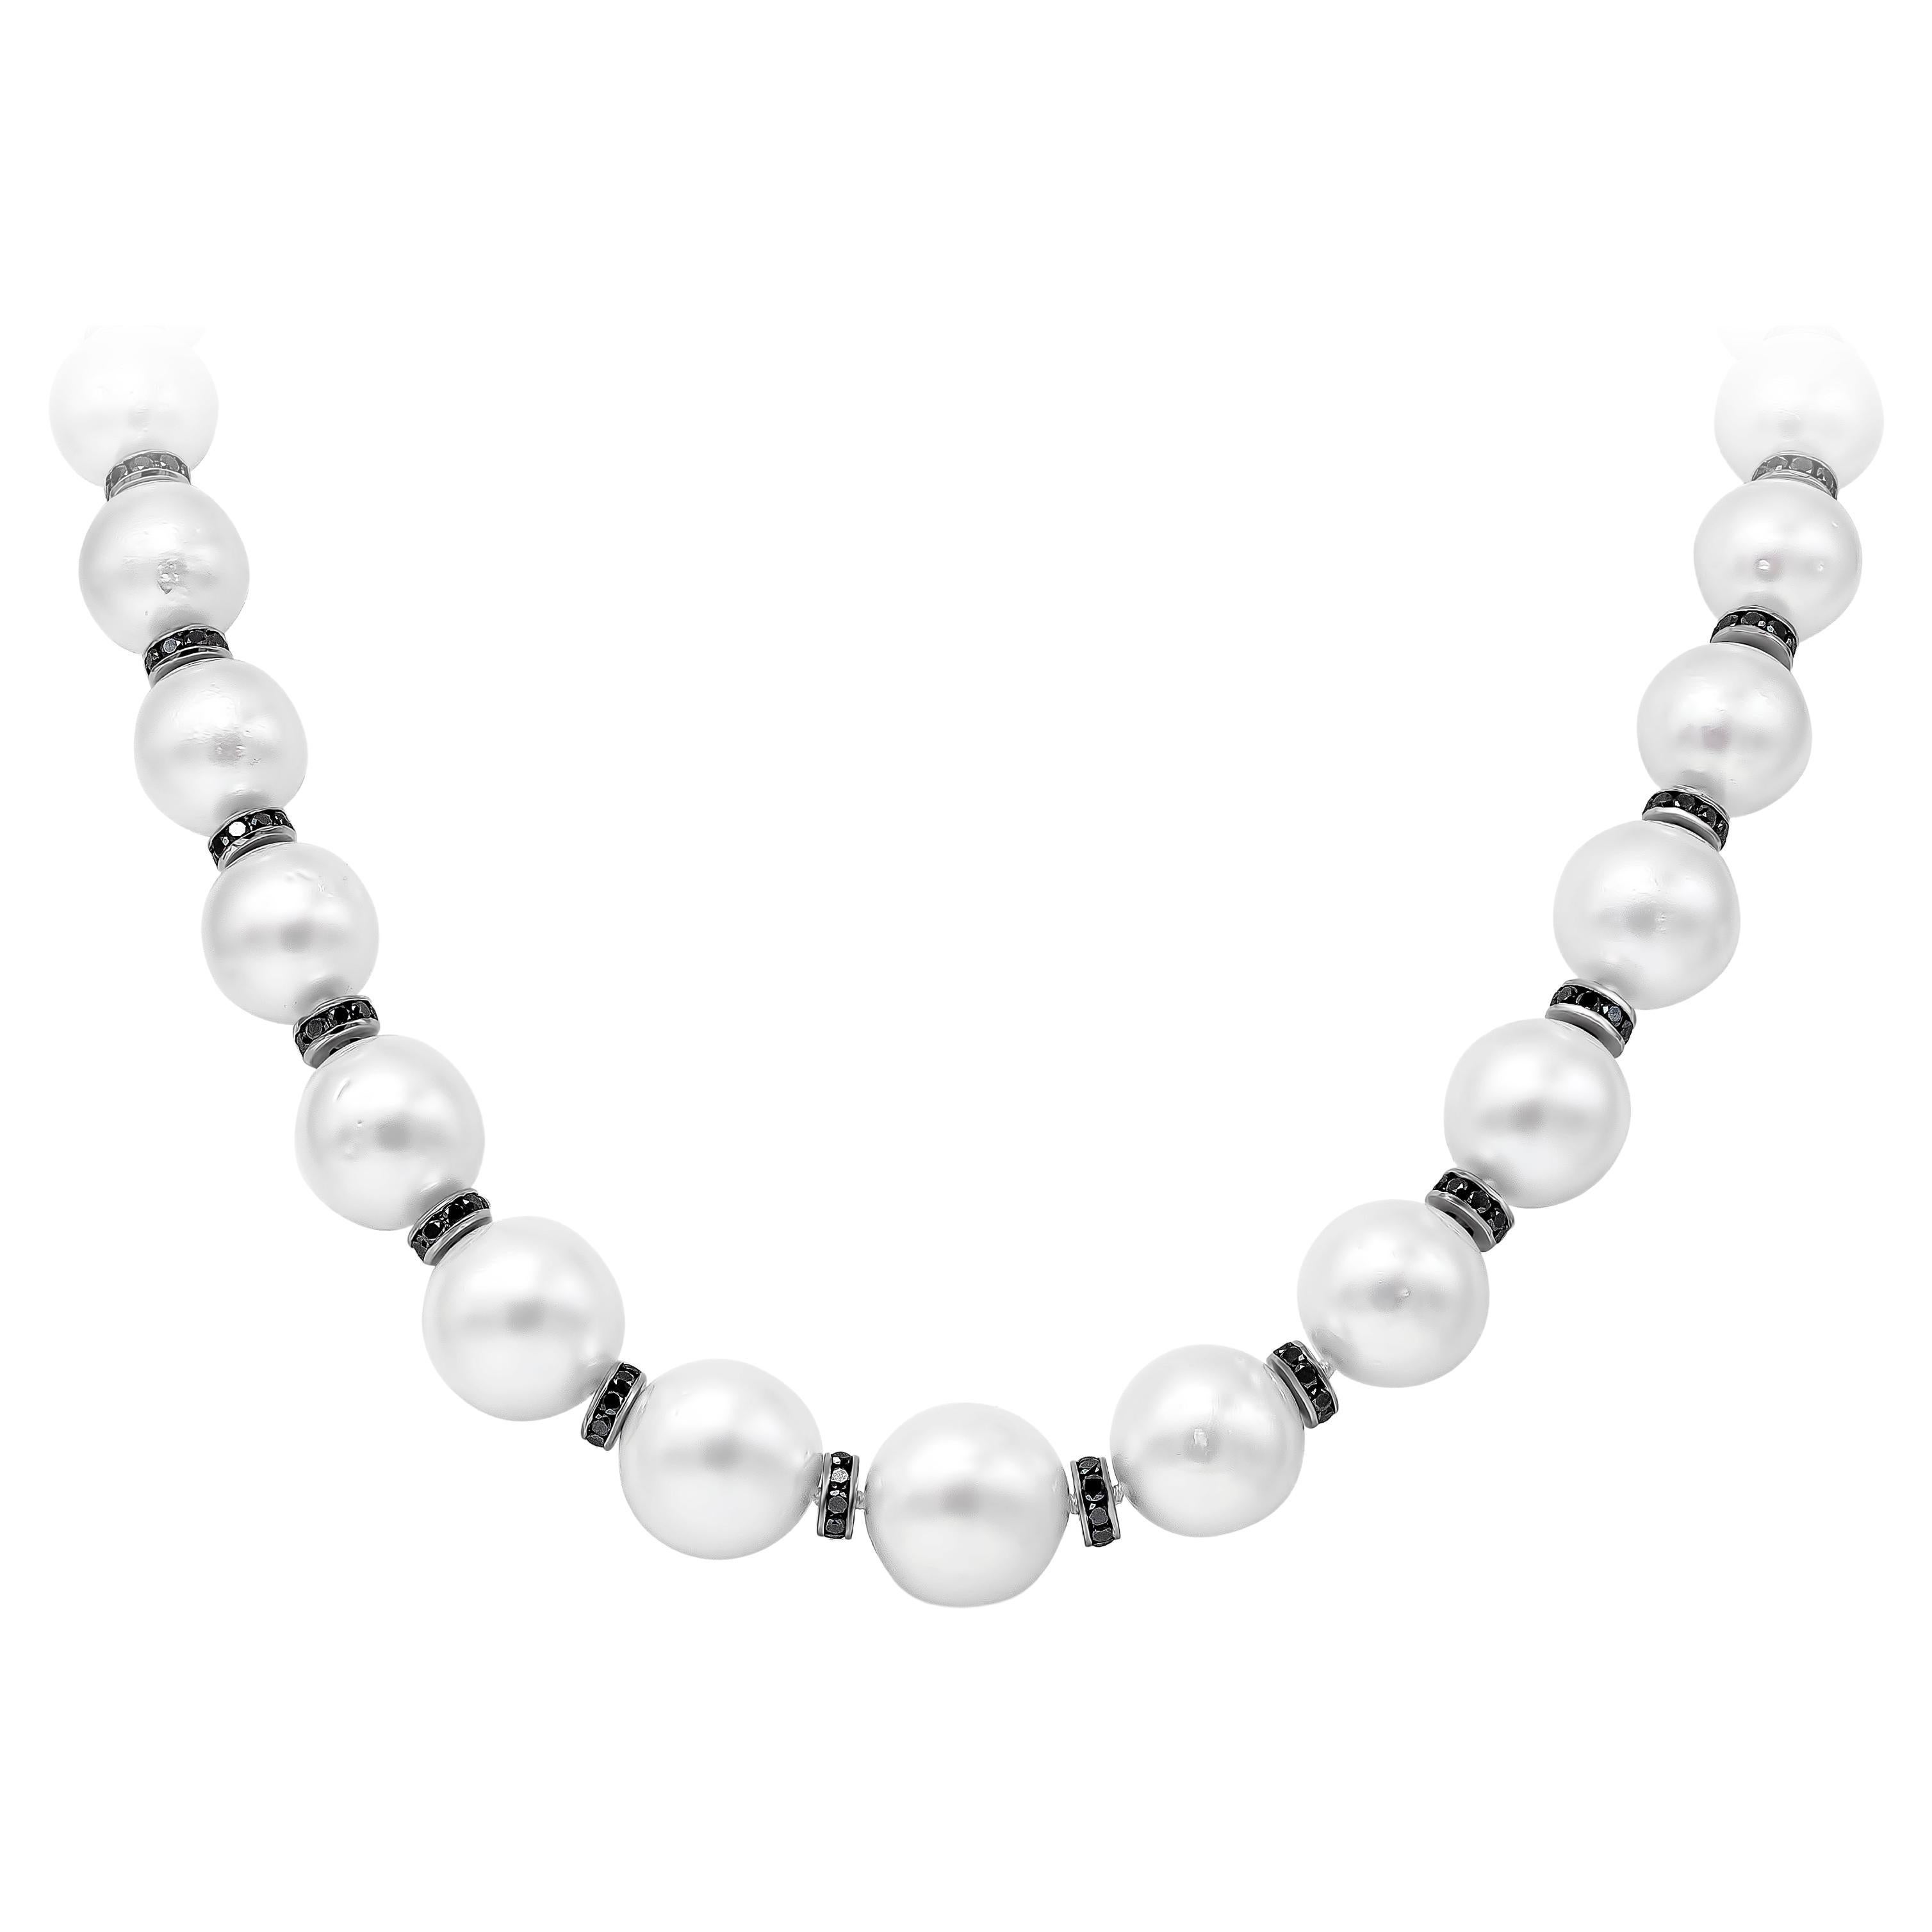 Roman Malakov 11.02 Carats Black Diamonds with Natural White Pearls Necklace For Sale